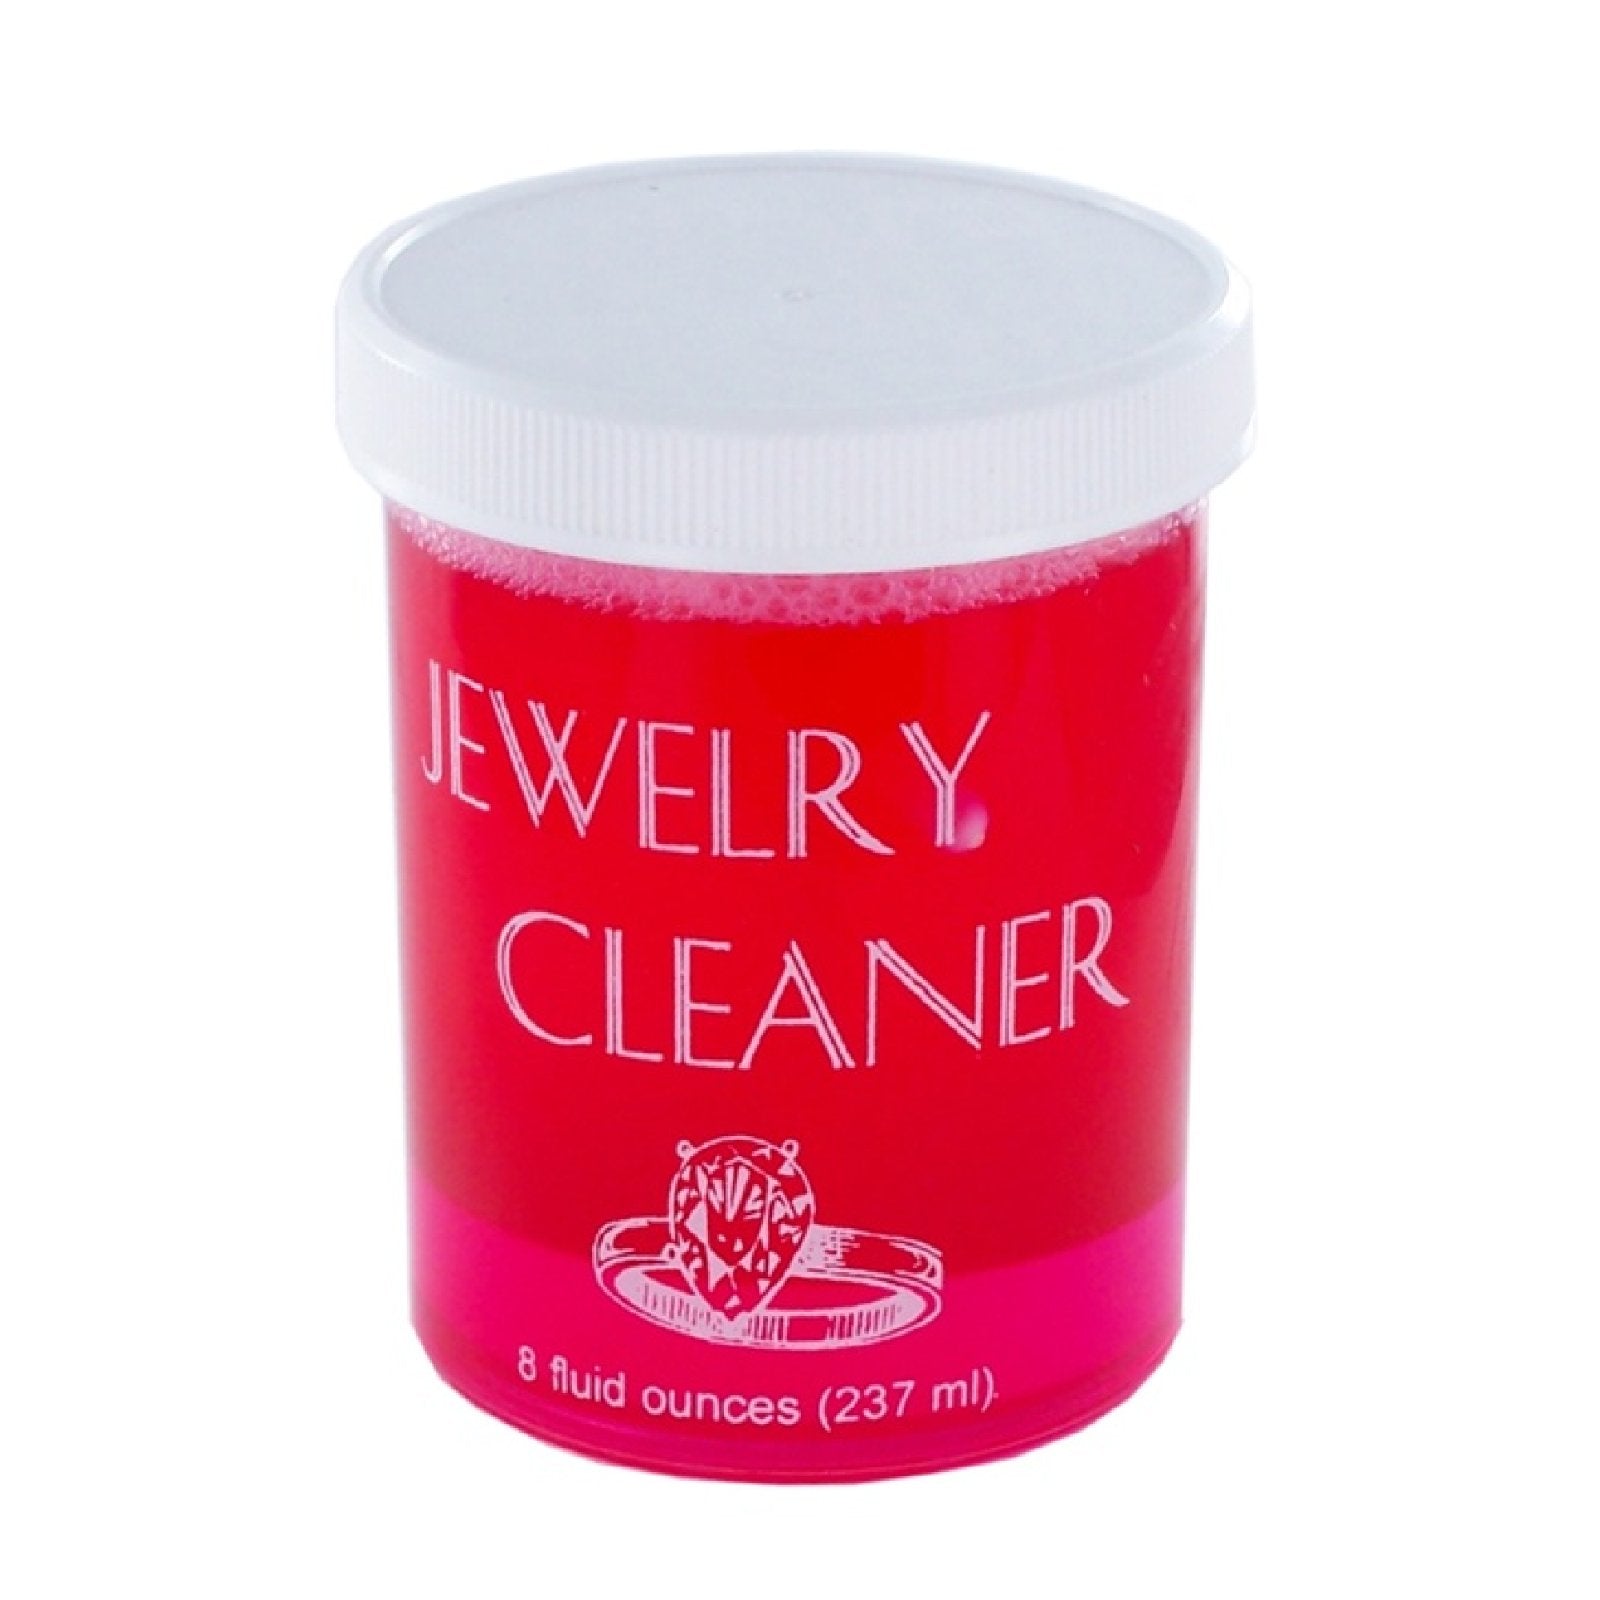 SILVER DIP CLEANER 8 OUNCES / 24 per case / SILVER CLEANER DIP